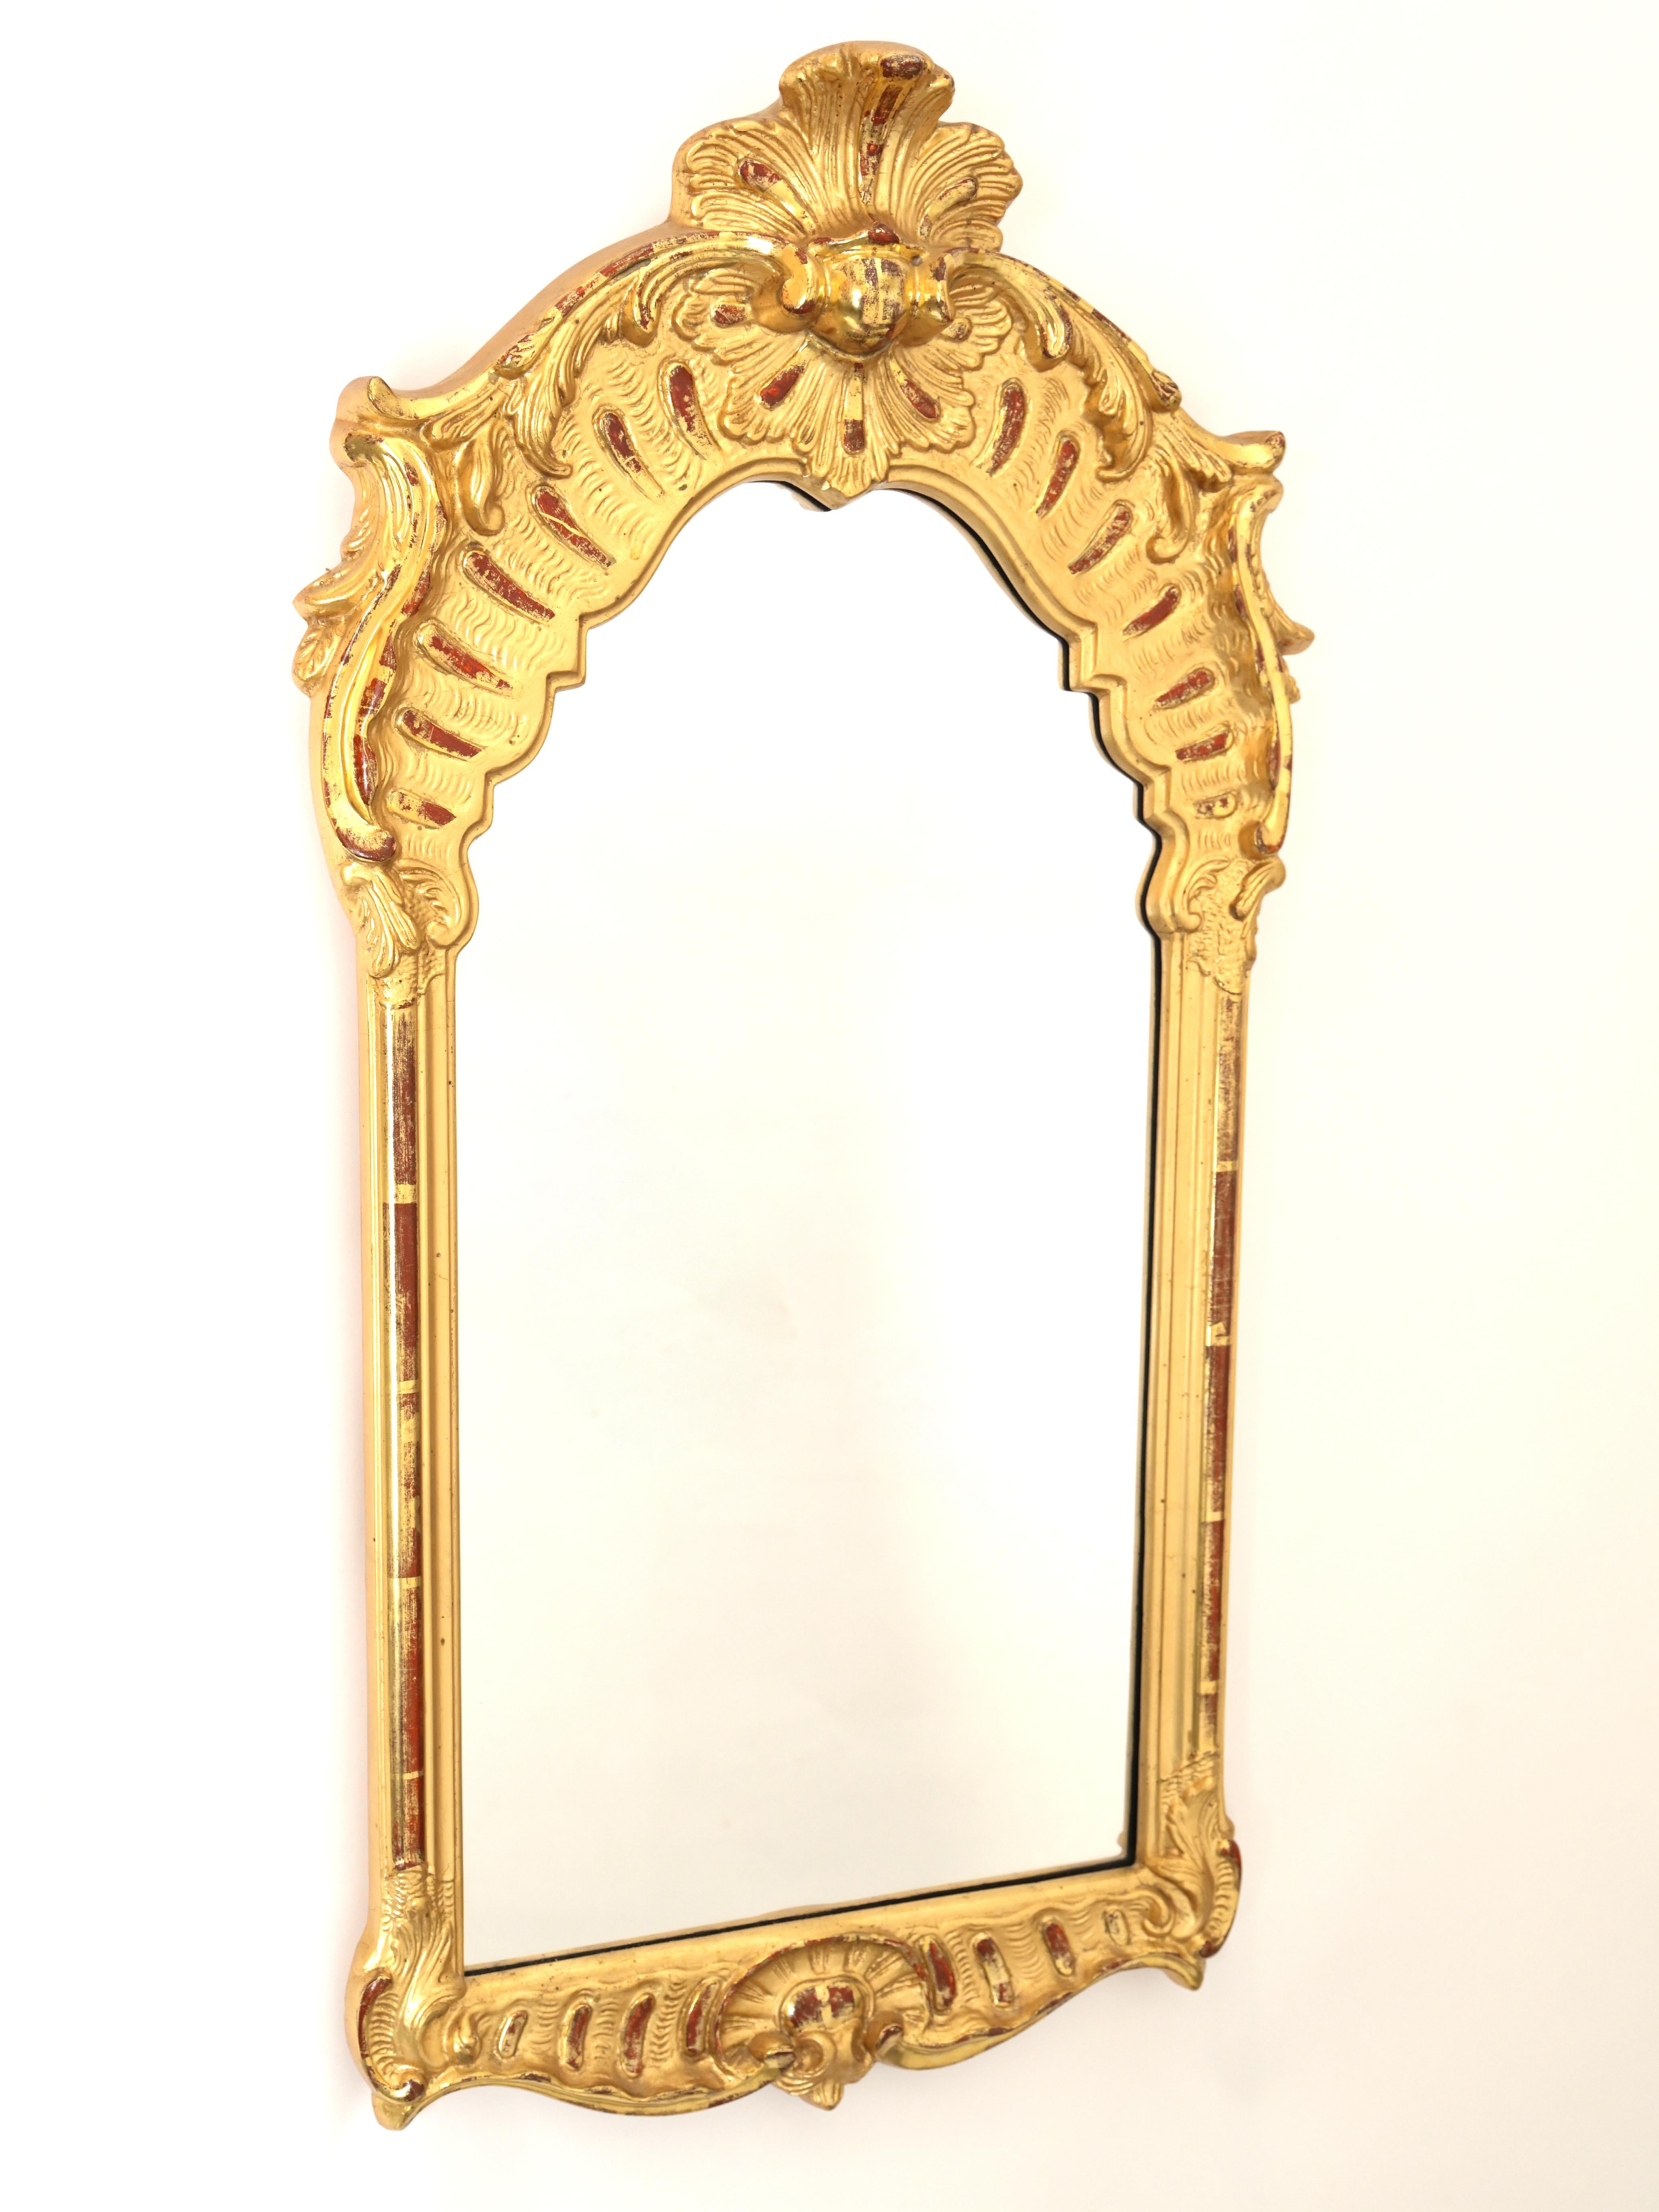 A 19th century Swedish Karl Johan Gilted mirror with ornate scallop wood carvings around the frame. c. 1830.